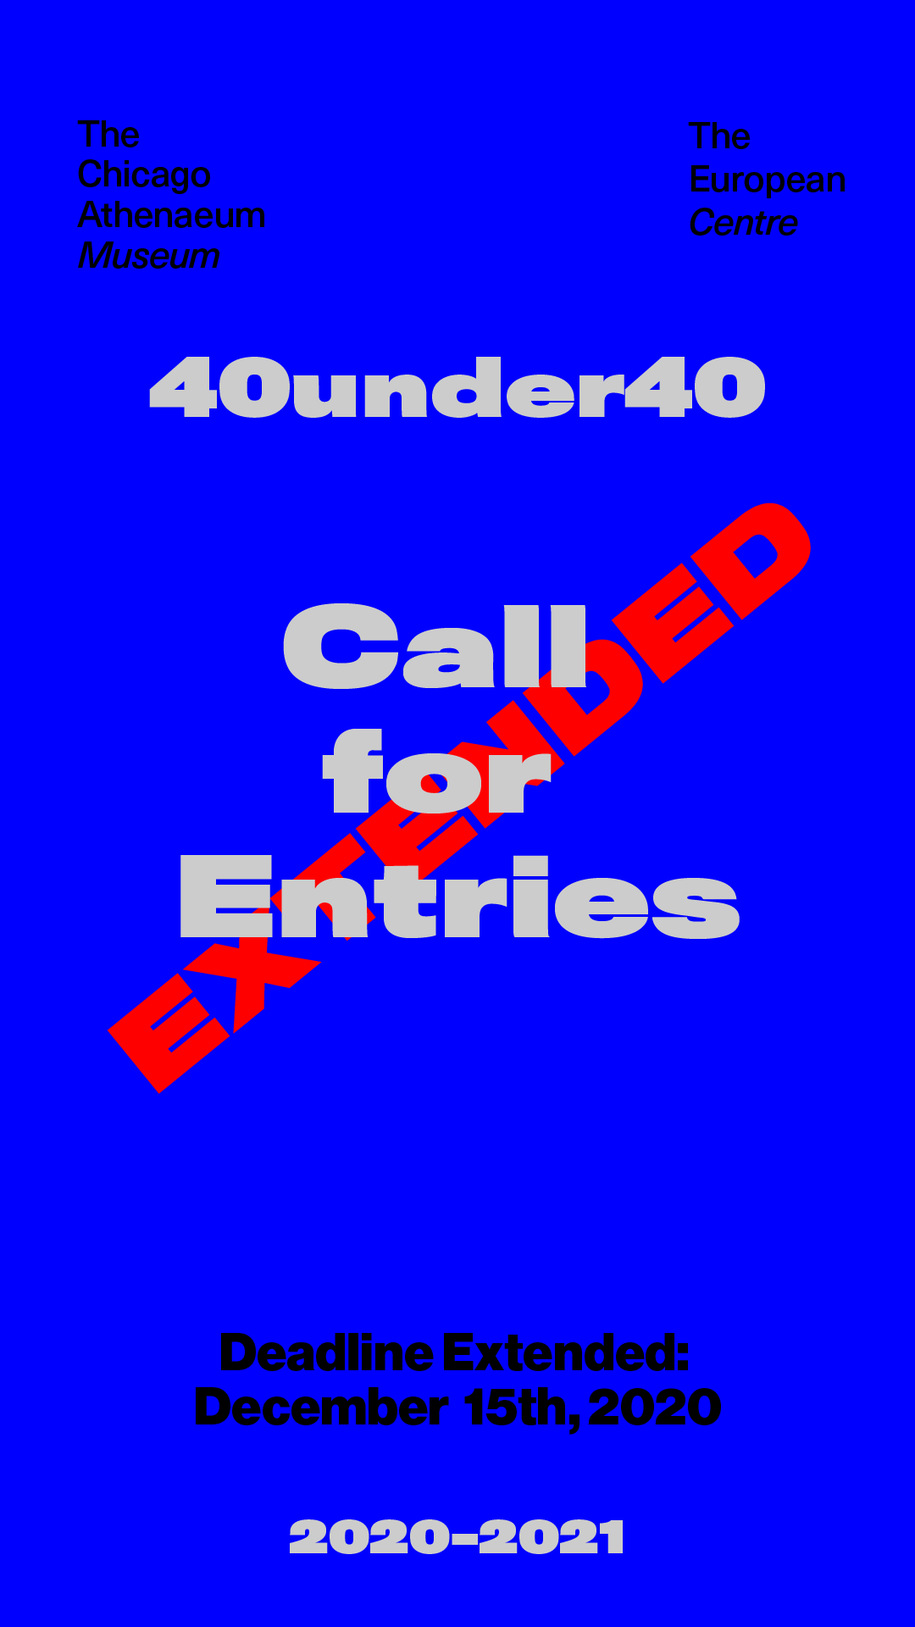 Archisearch Europe 40 under 40®Awards | Open call for Entries